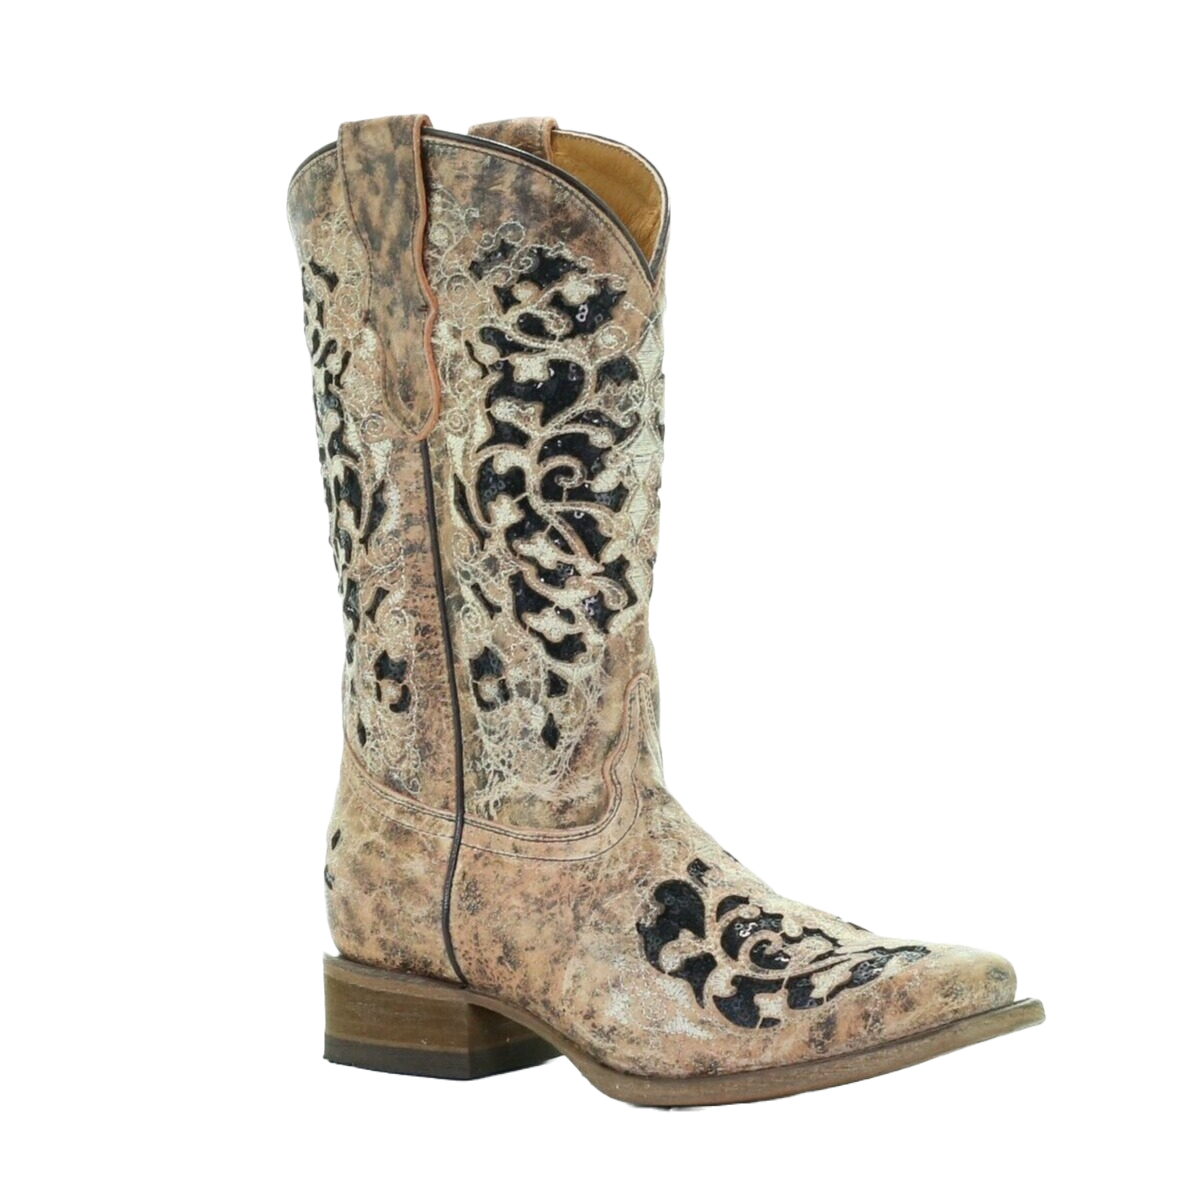 Corral Teens Tan & Black Glitter Inlay & Embroidery Boots T0042